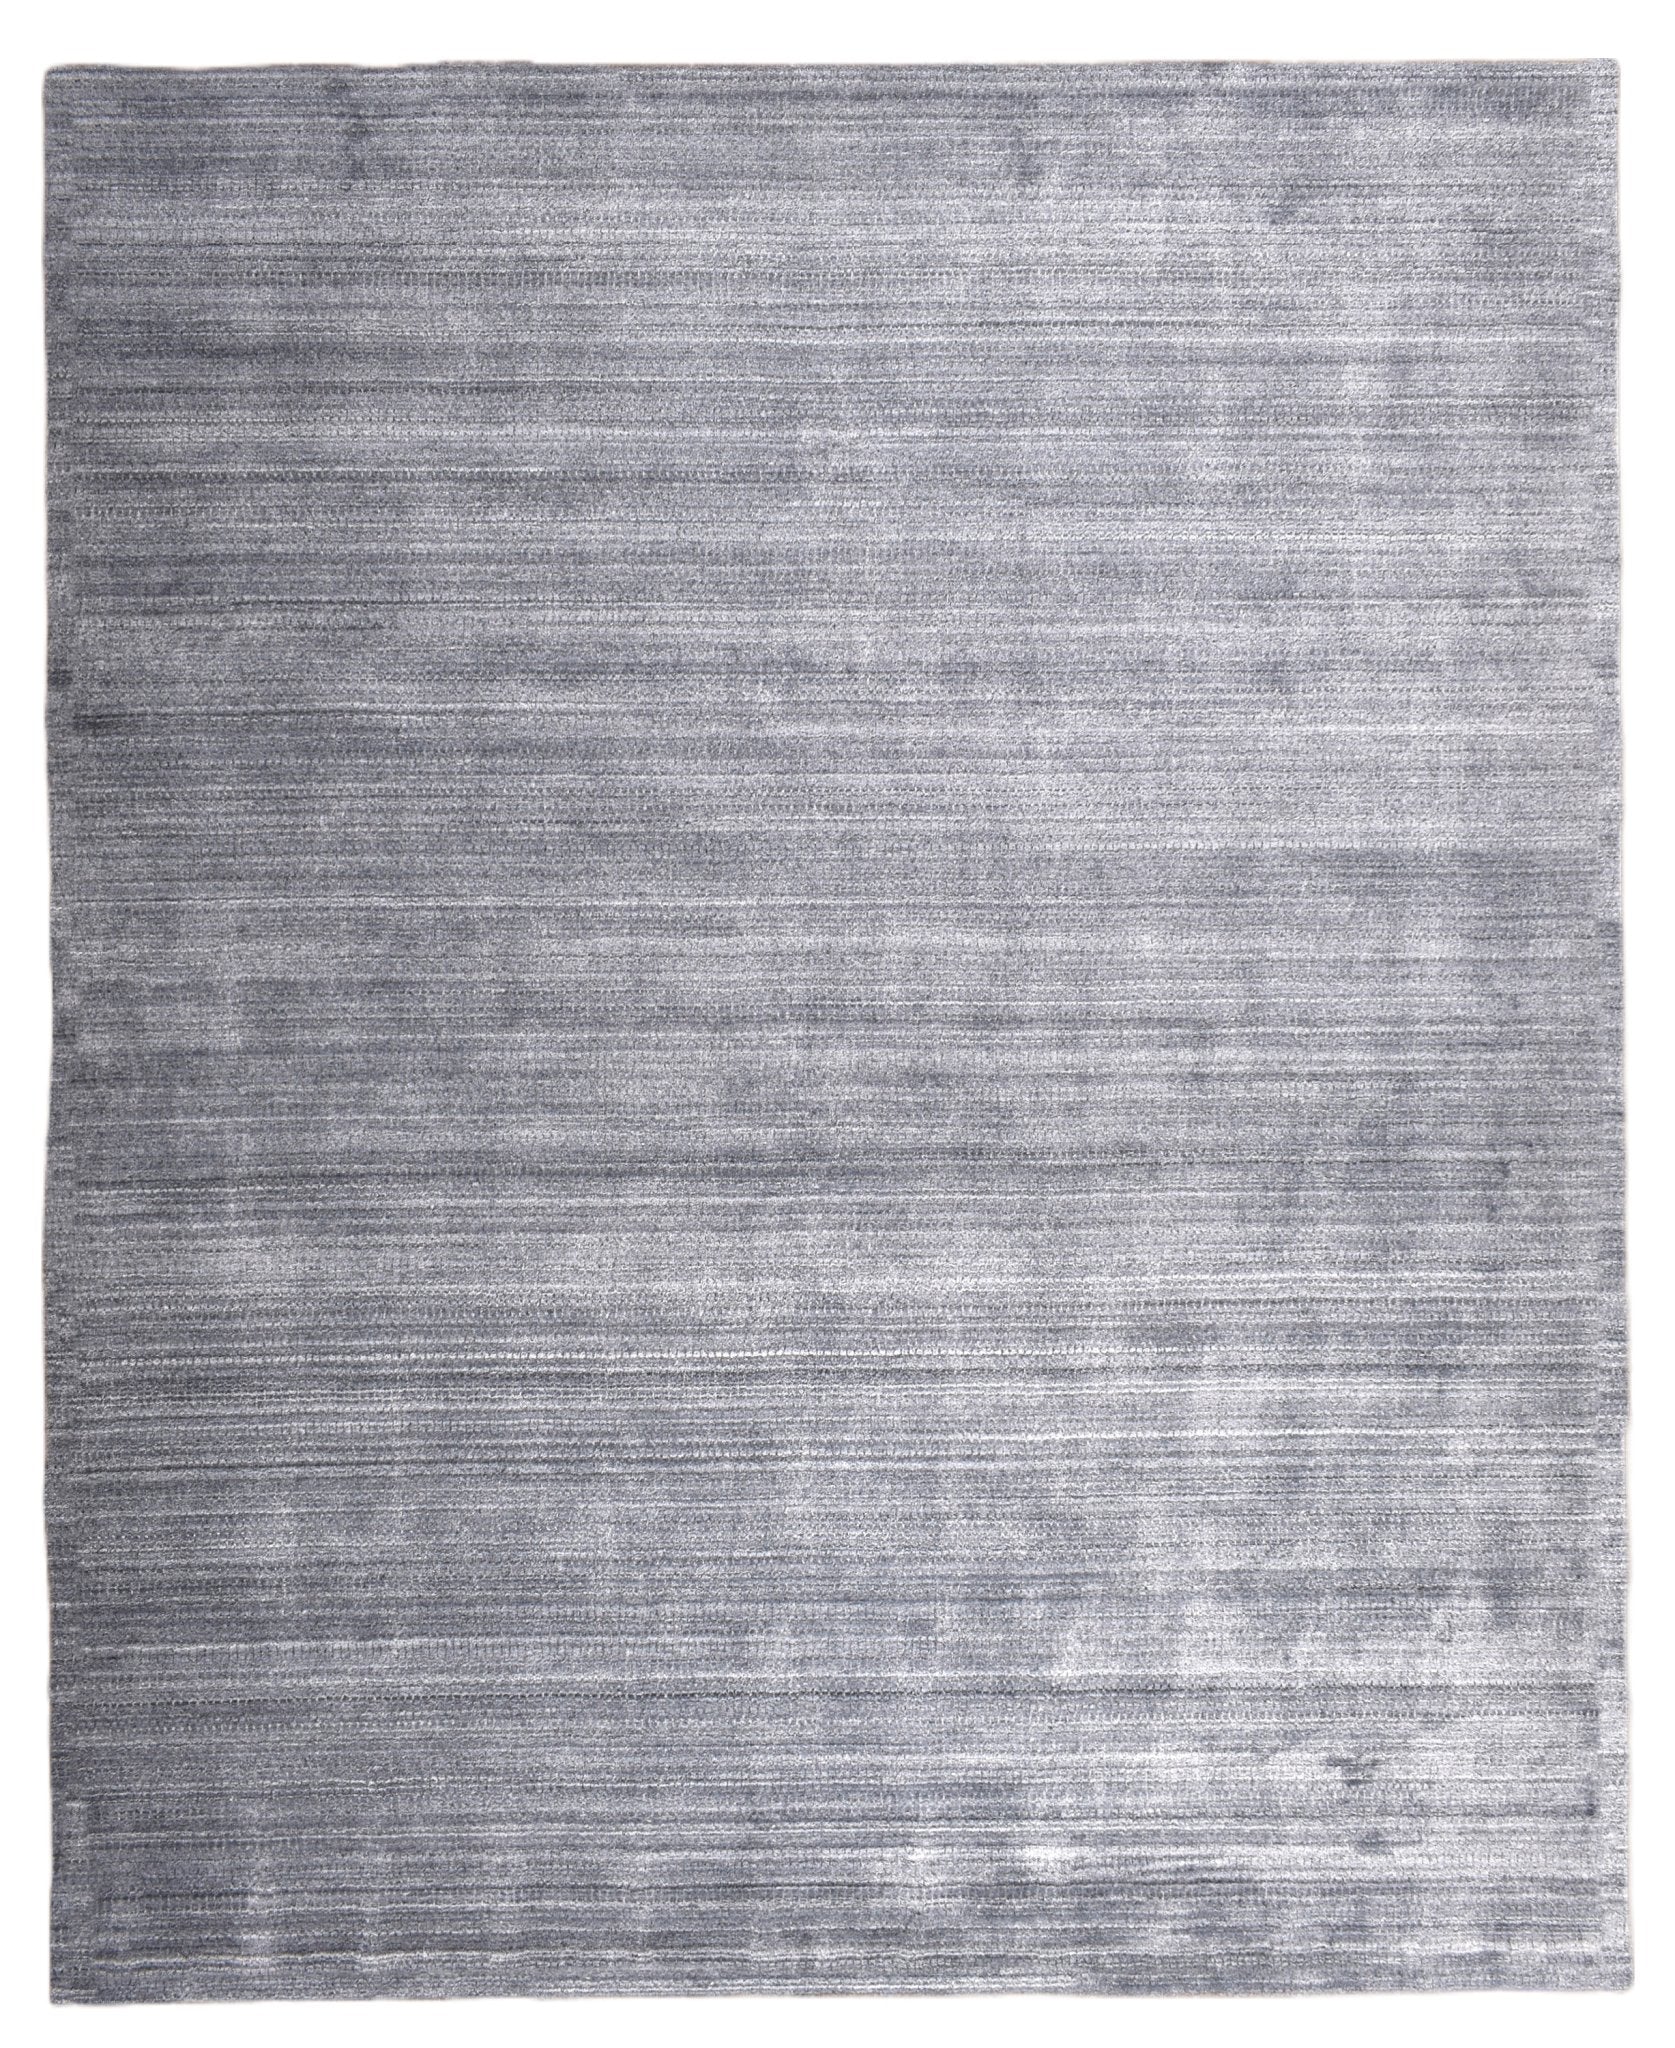 Small Check Pale Orchid Rug - Rug & Home